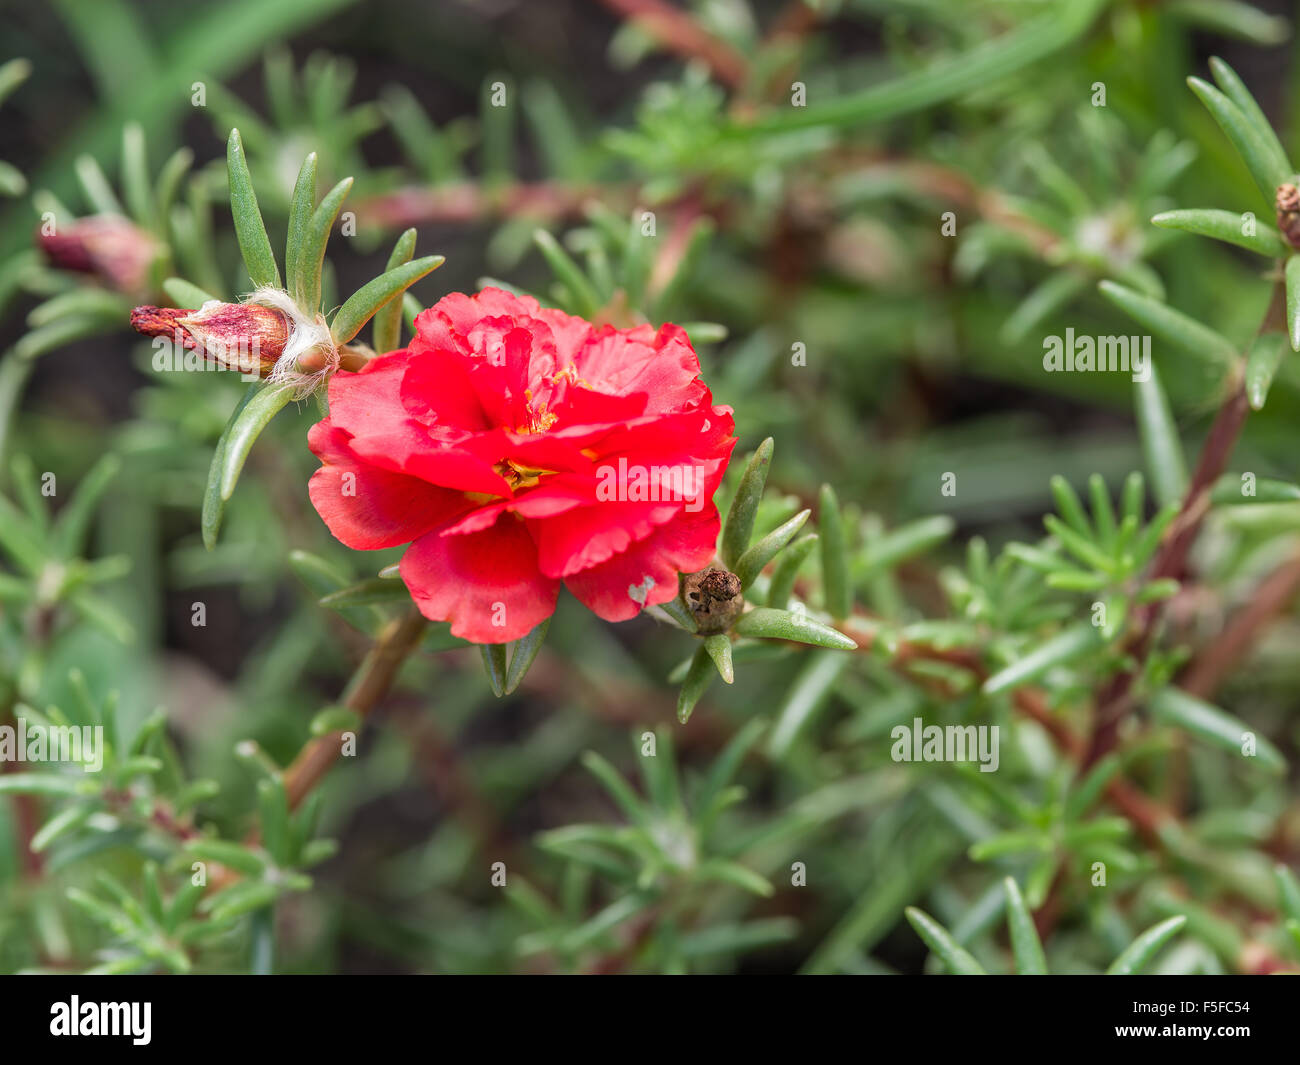 Red pursuance flower in the garden. Stock Photo